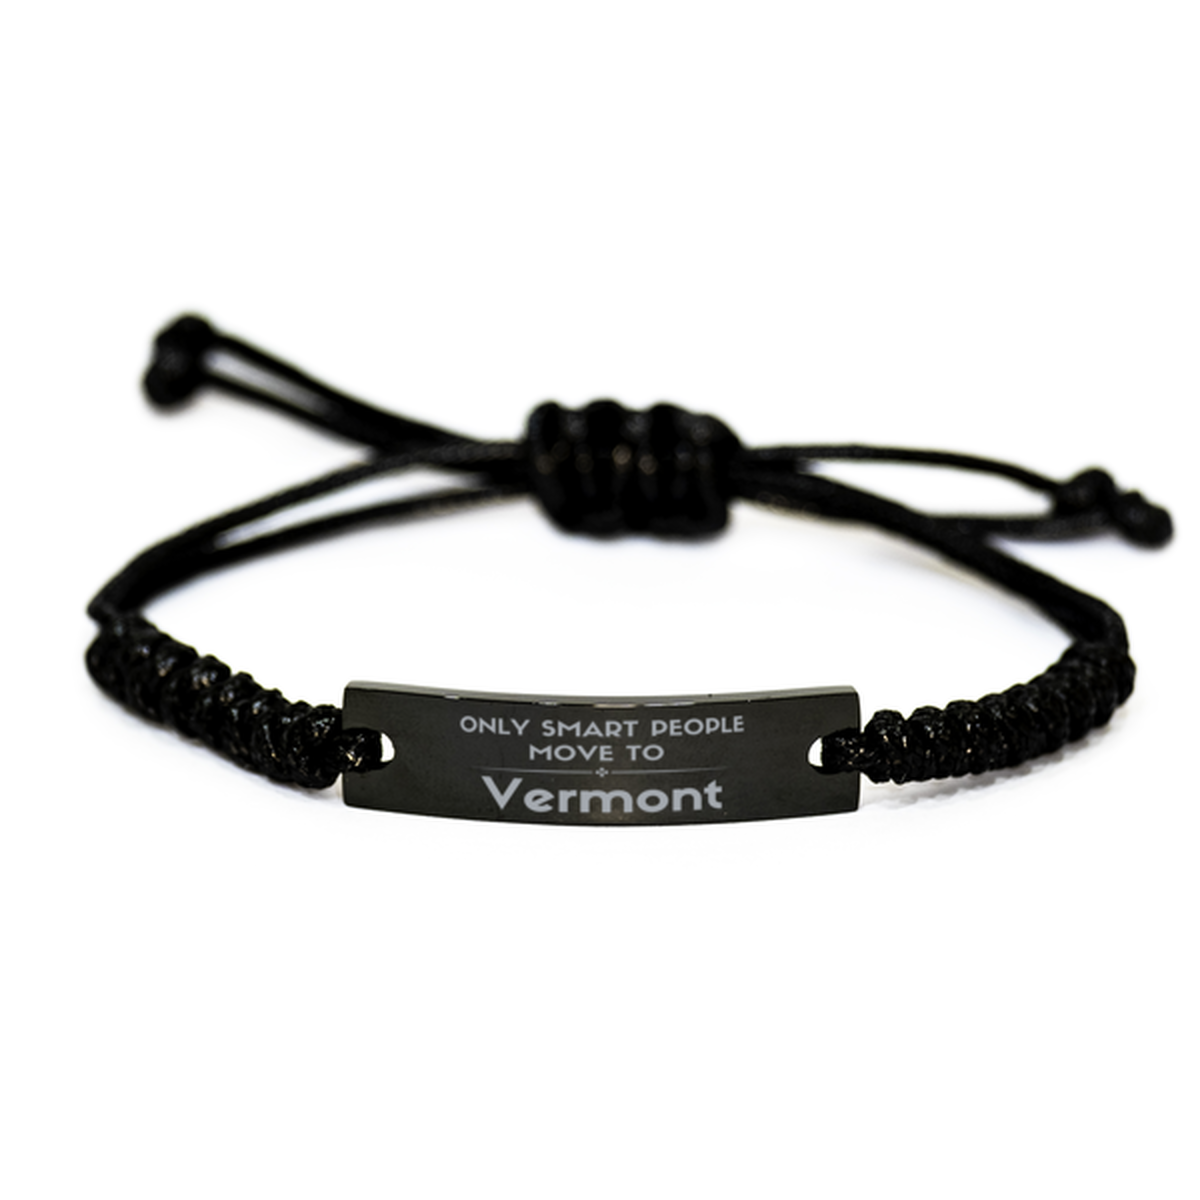 Only smart people move to Vermont Black Rope Bracelet, Gag Gifts For Vermont, Move to Vermont Gifts for Friends Coworker Funny Saying Quote